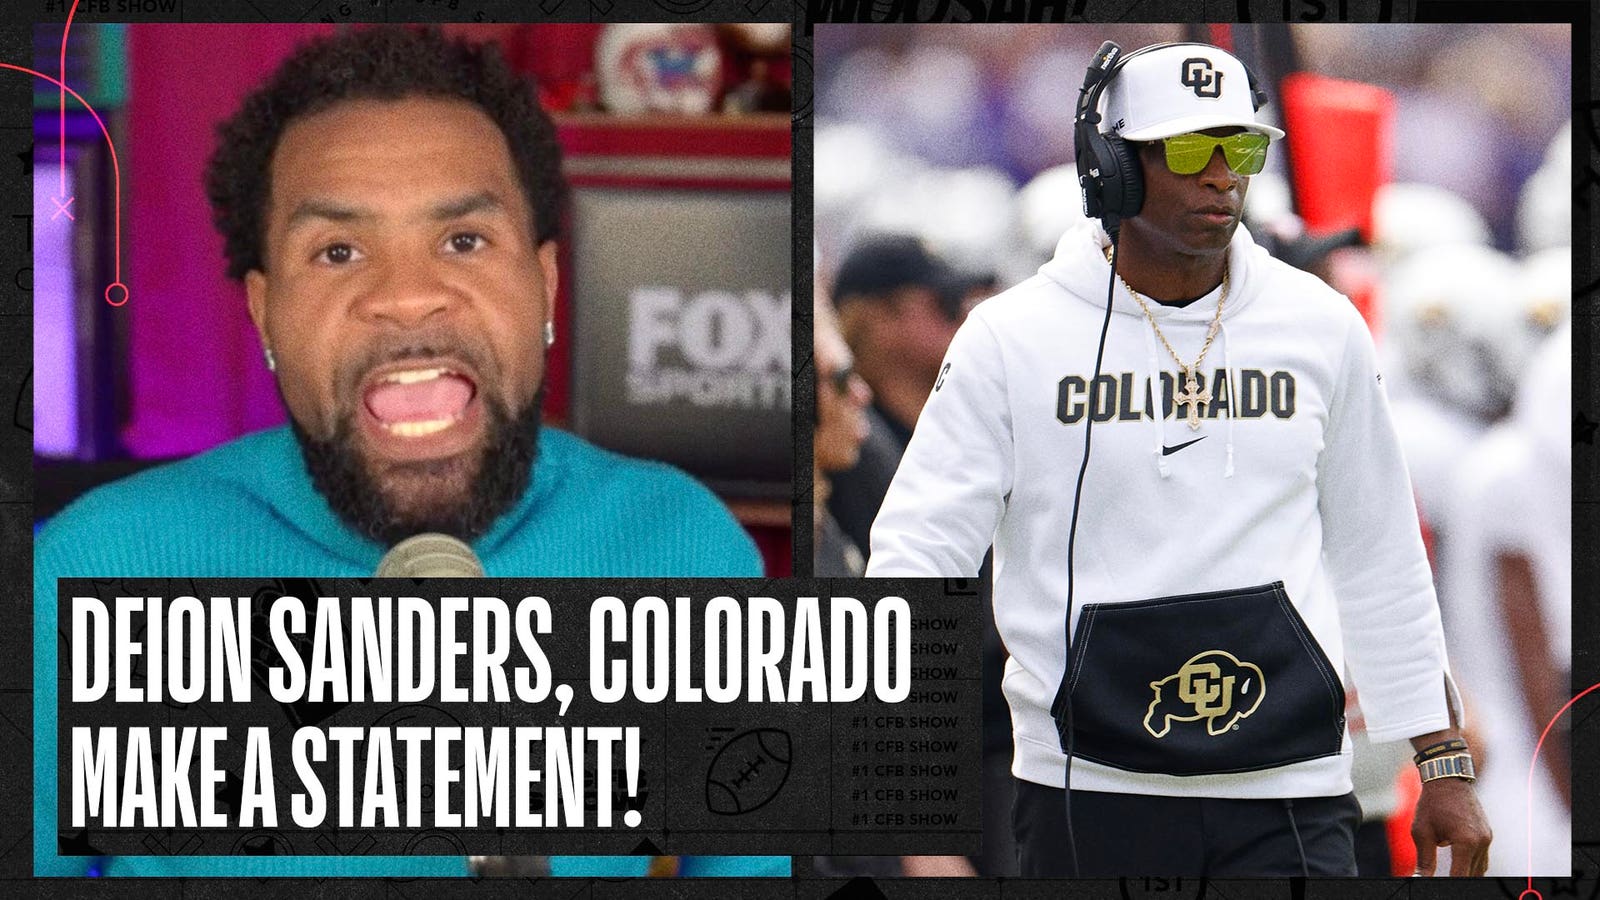 RJ Young reacts to Deion Sanders, Colorado's upset victory over No. 17 TCU 